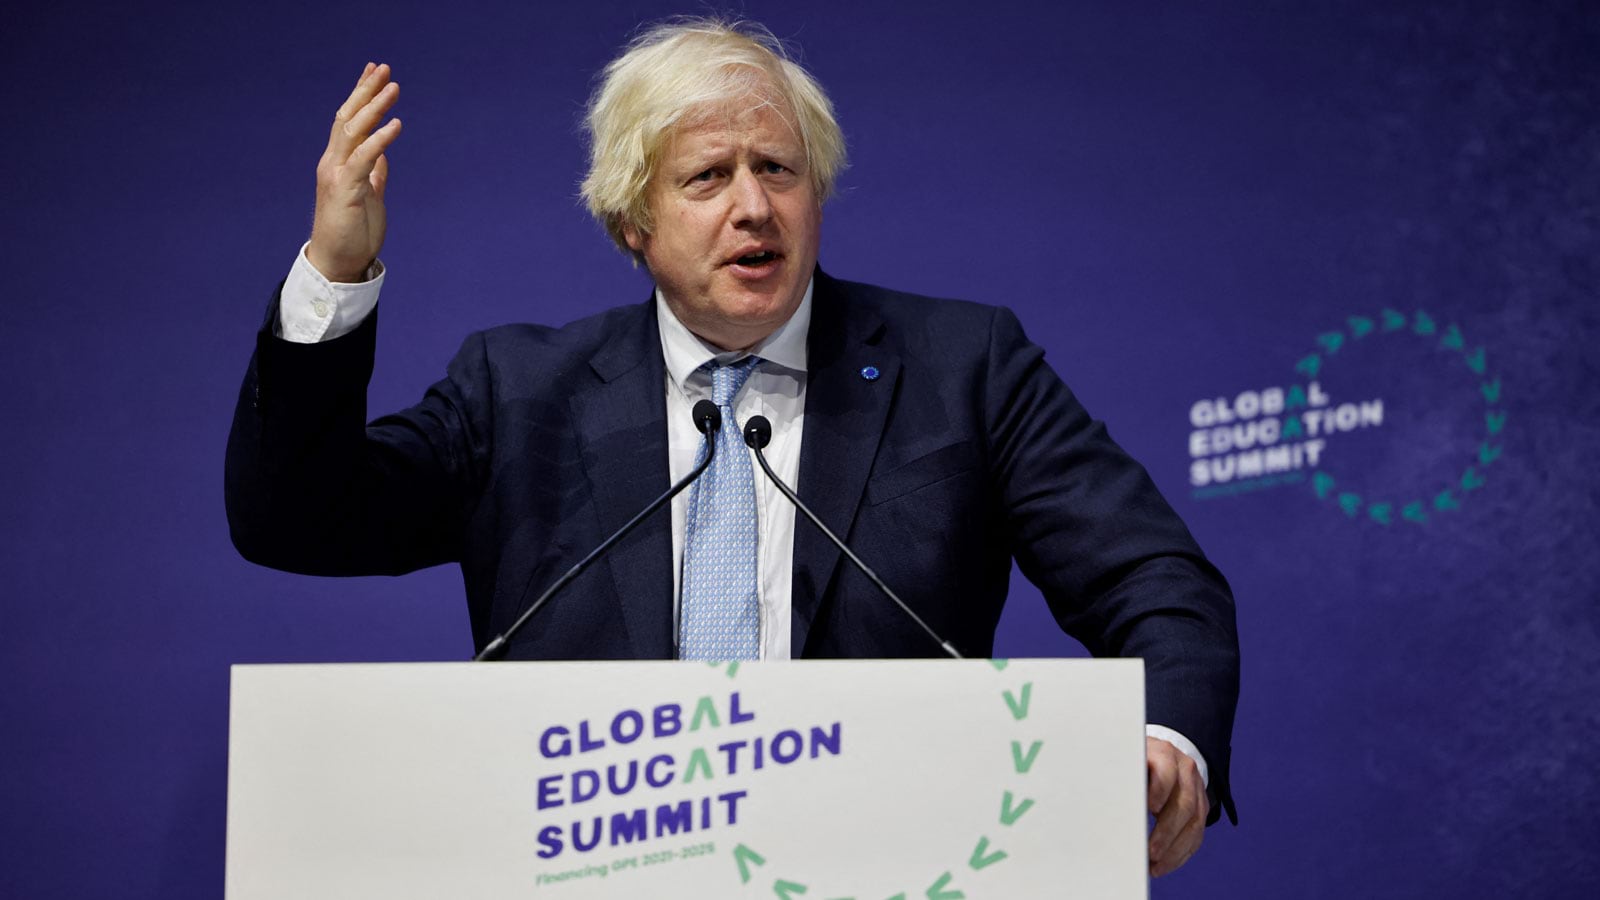 UK's Johnson: Iran must face up to consequences of “outrageous” ship attack